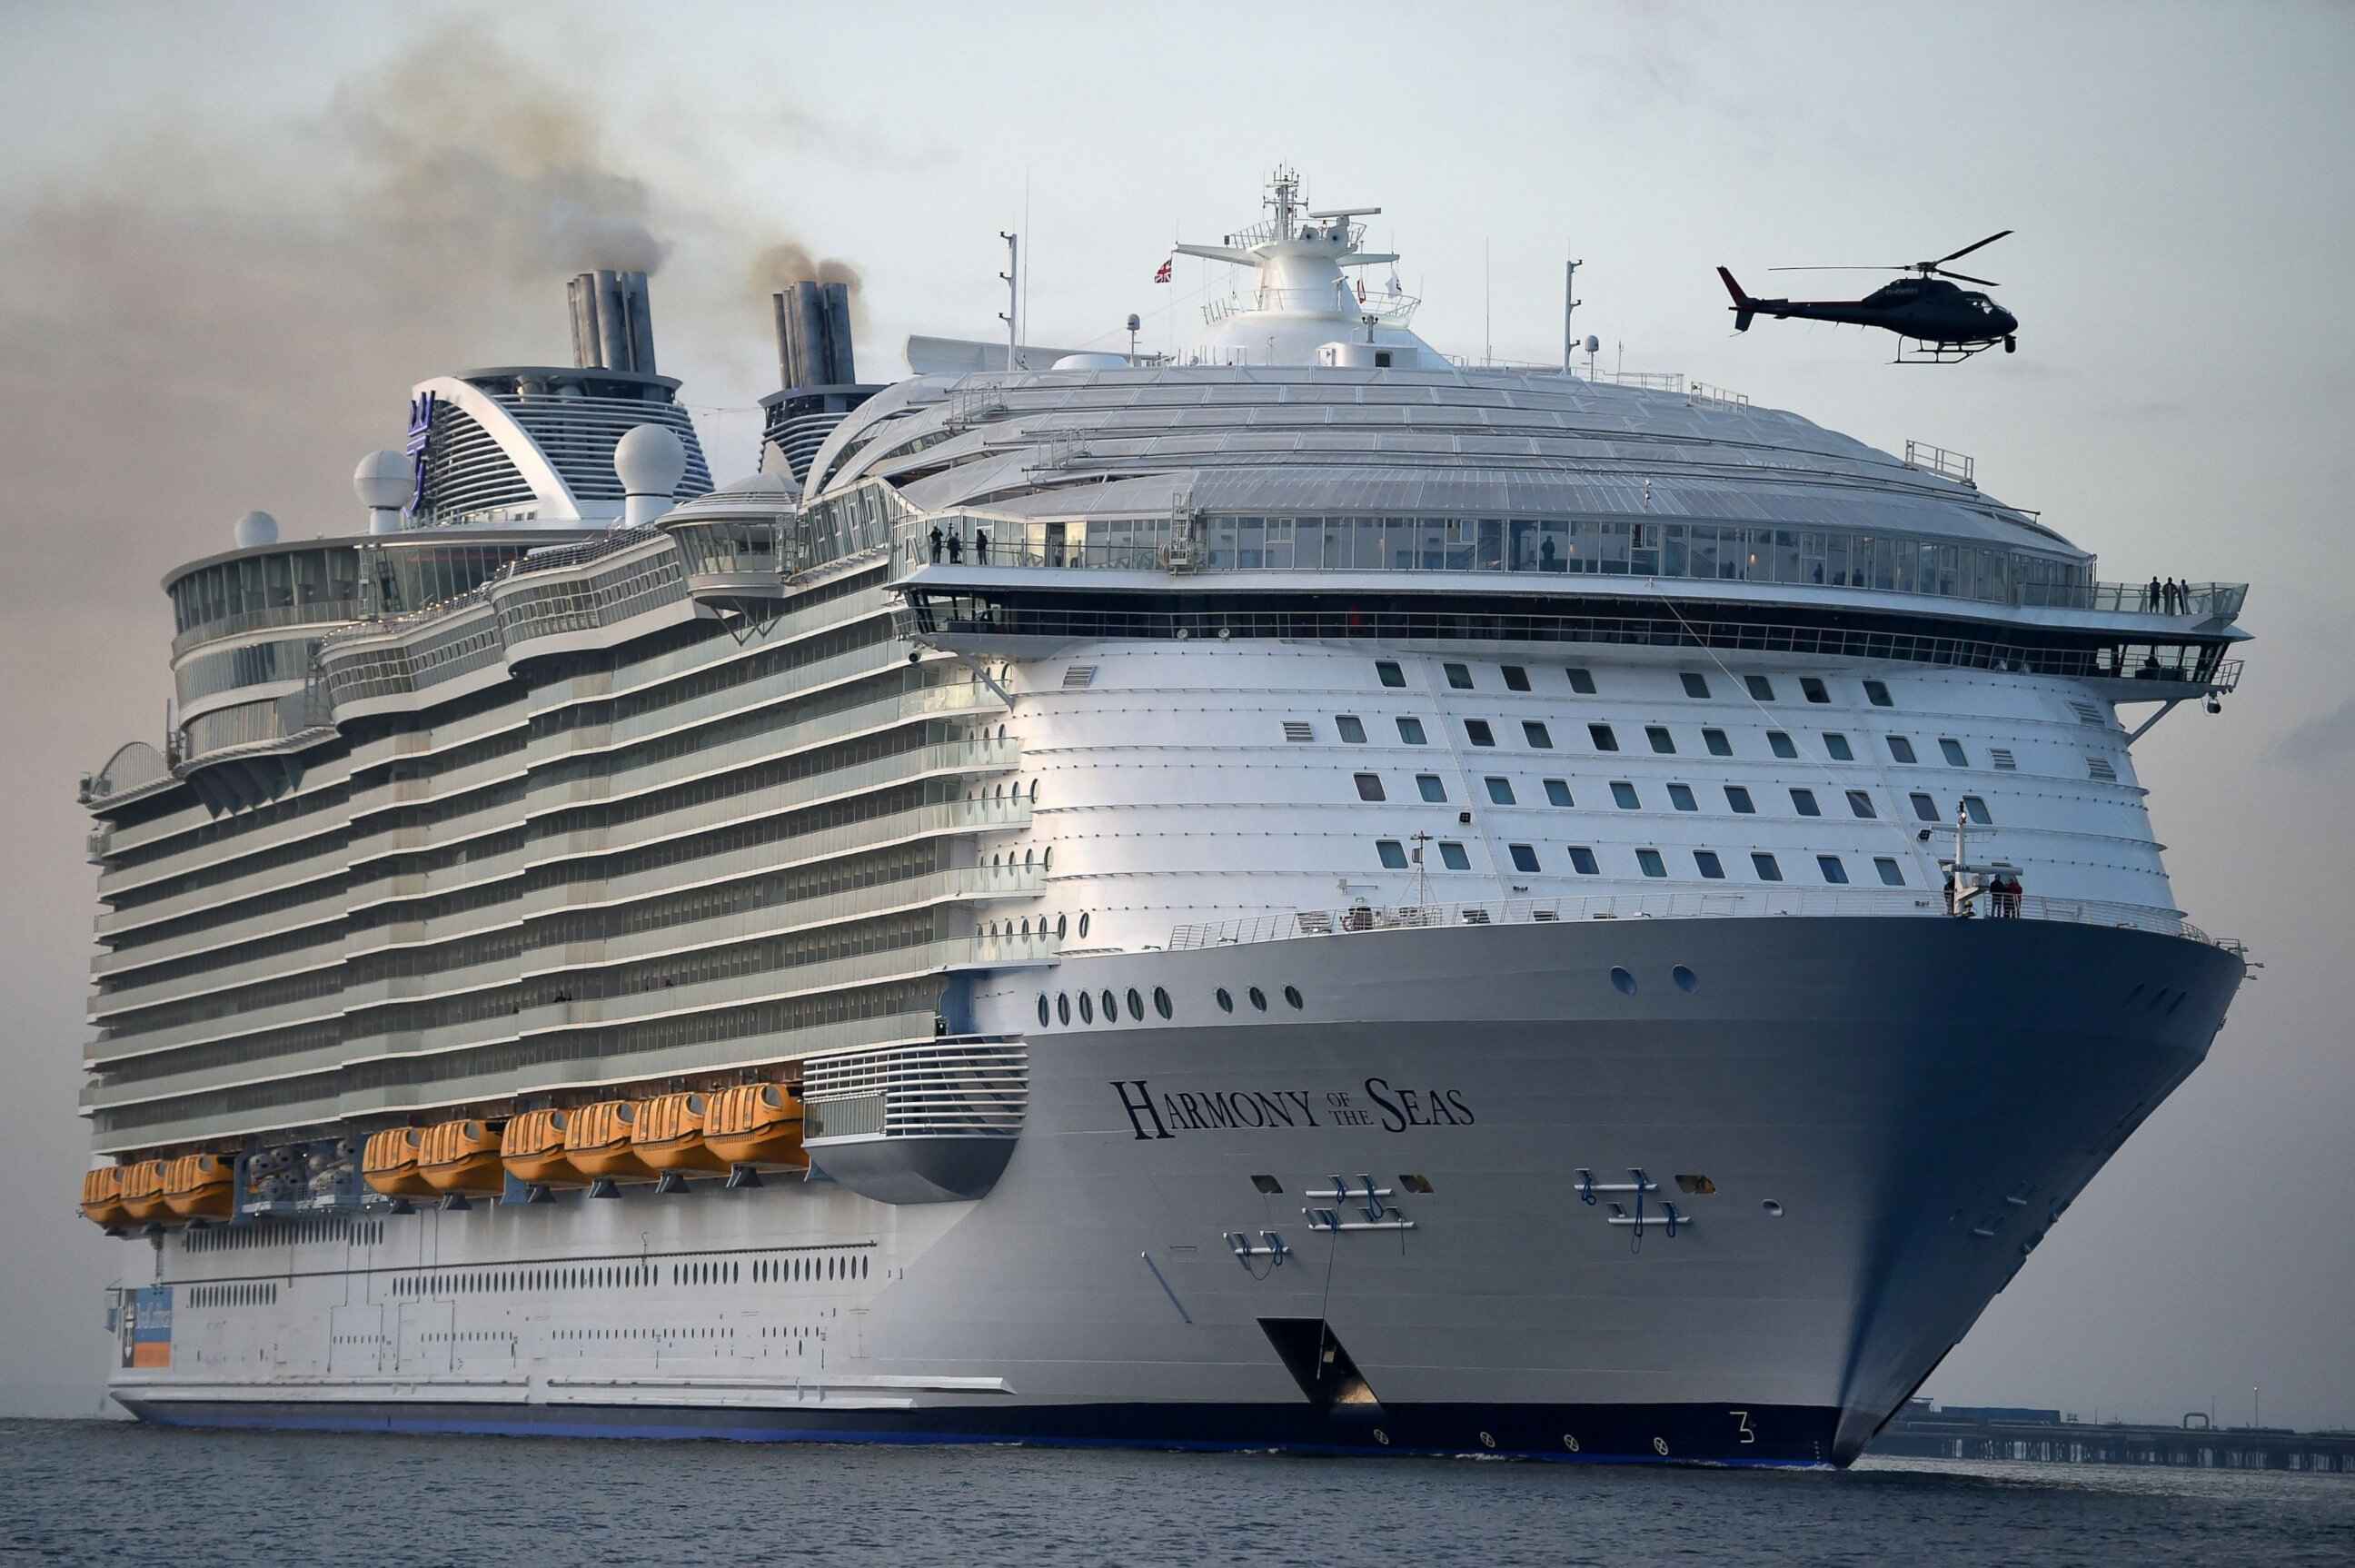 Tragedy Strikes On Royal Caribbean Cruise Ship: Teen Passenger Dies After Fall From Balcony